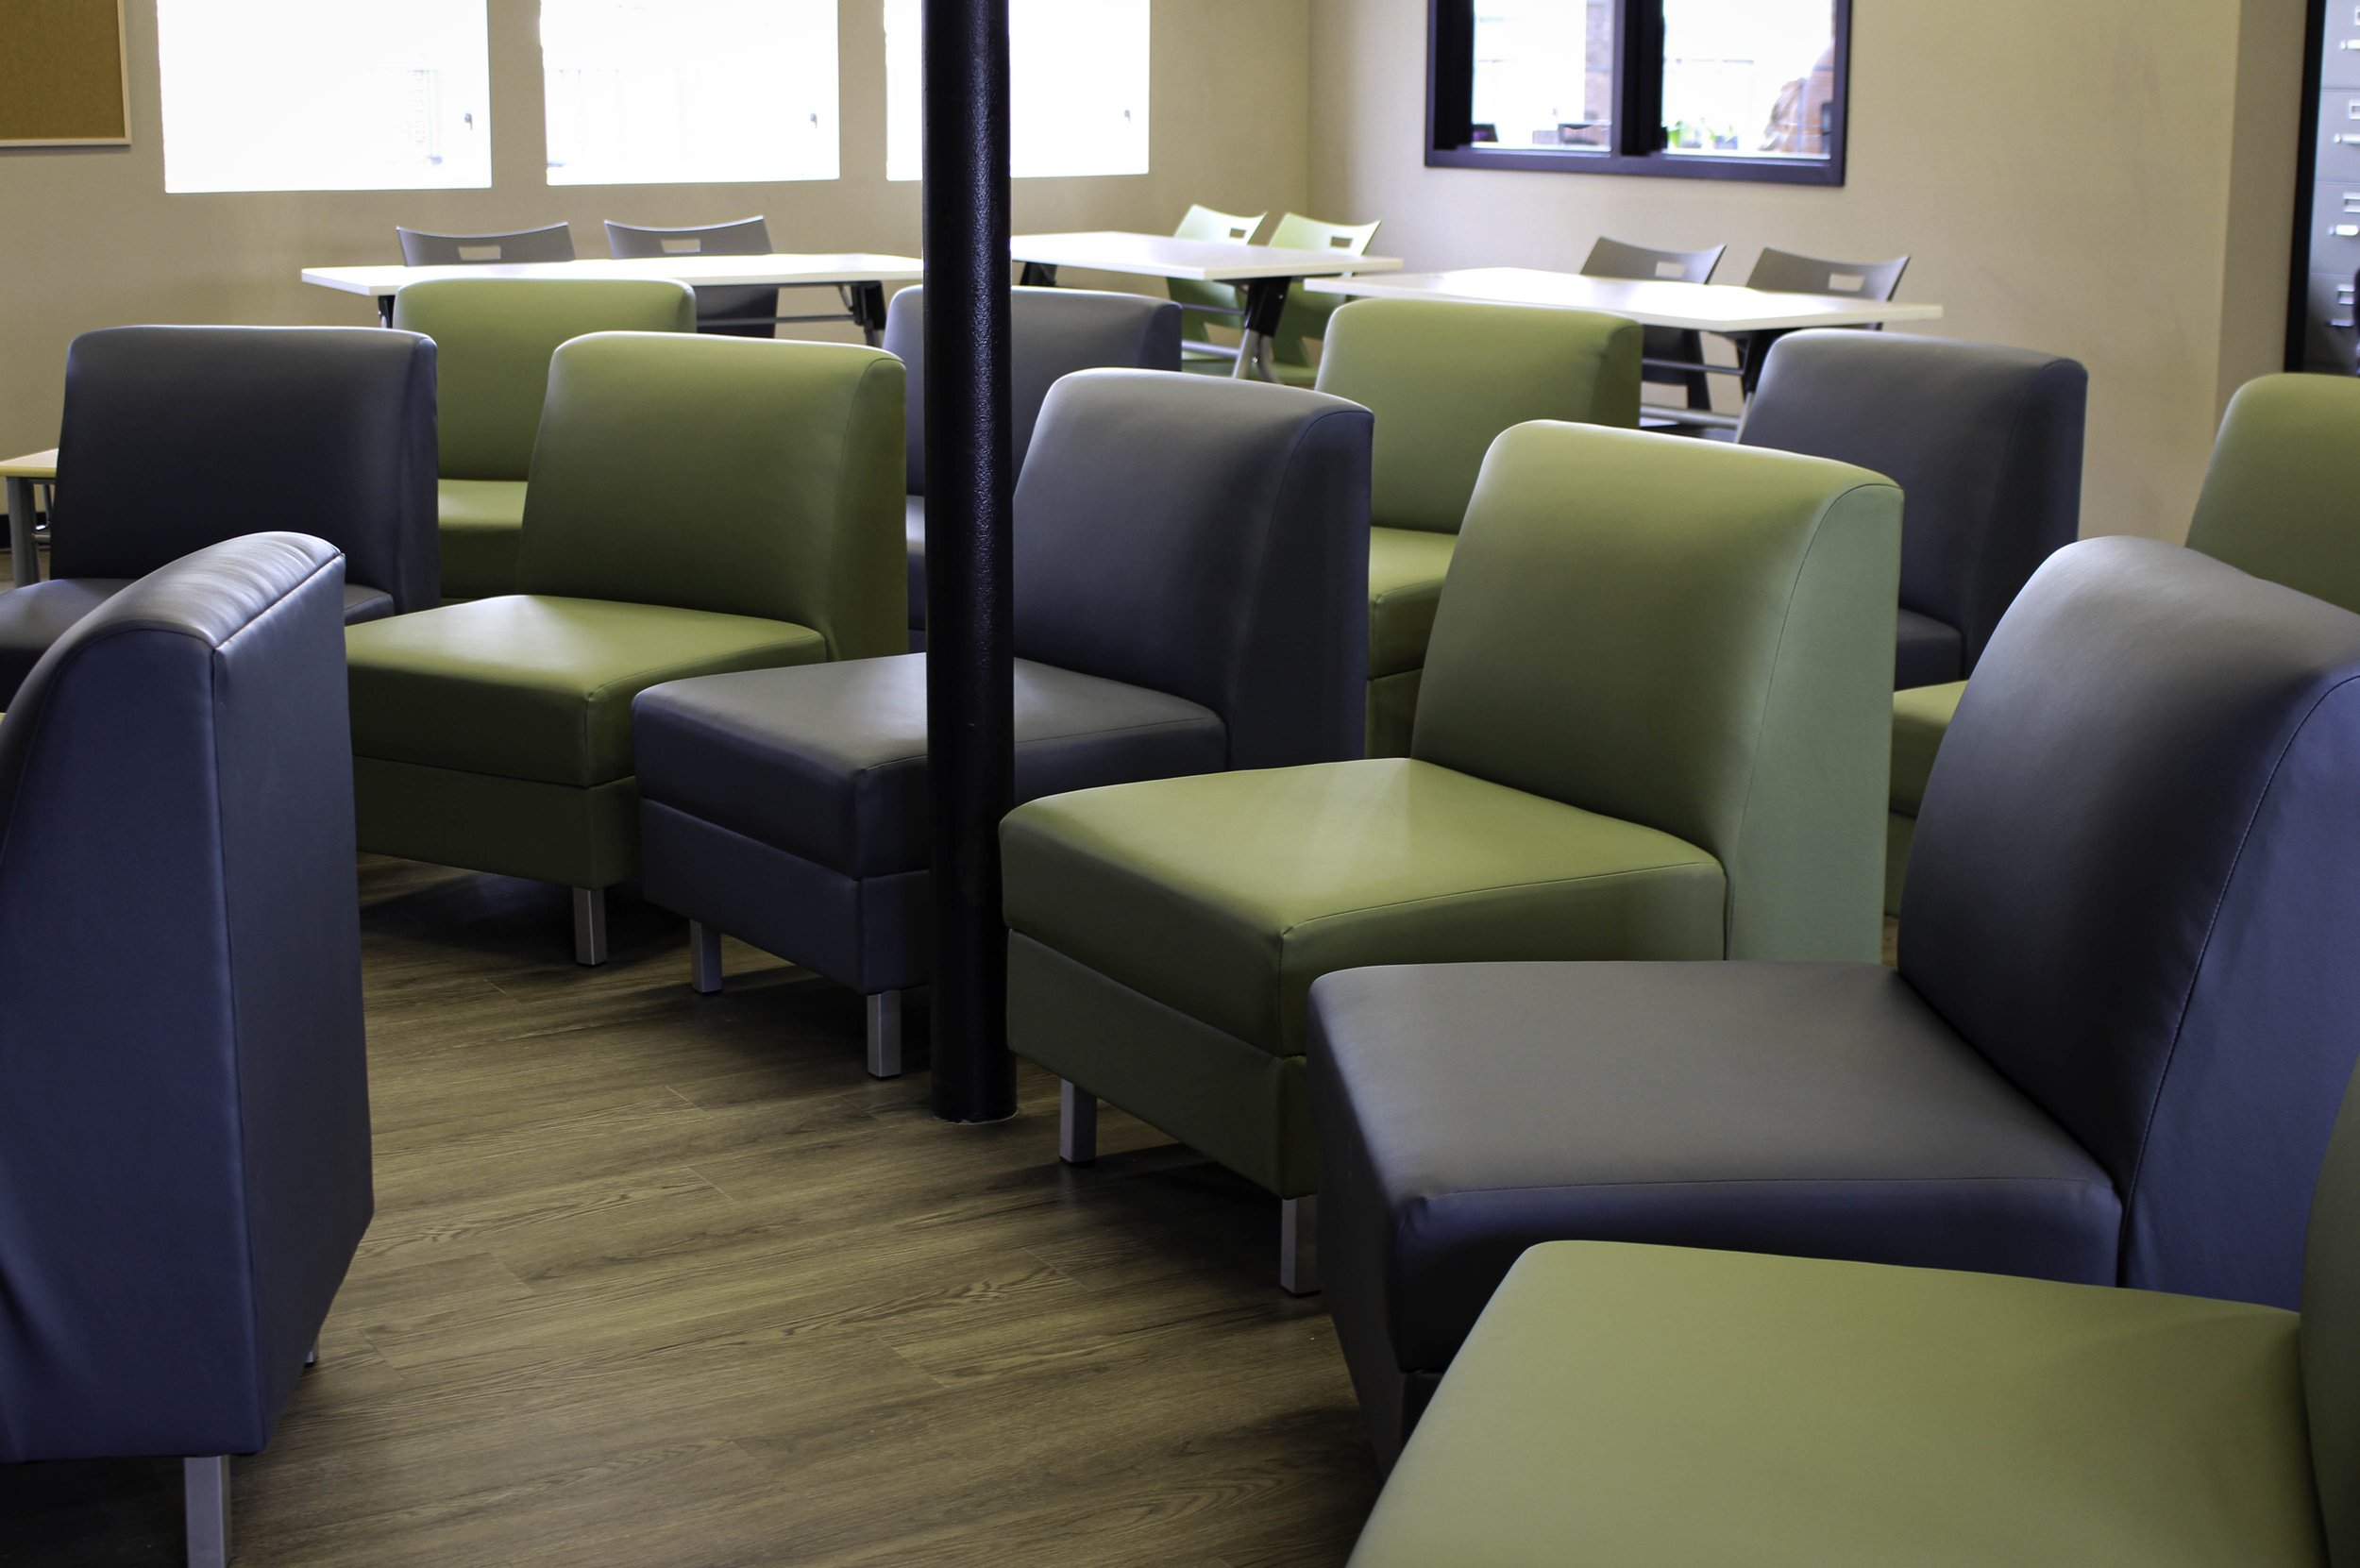 green and blue soft chairs.jpg